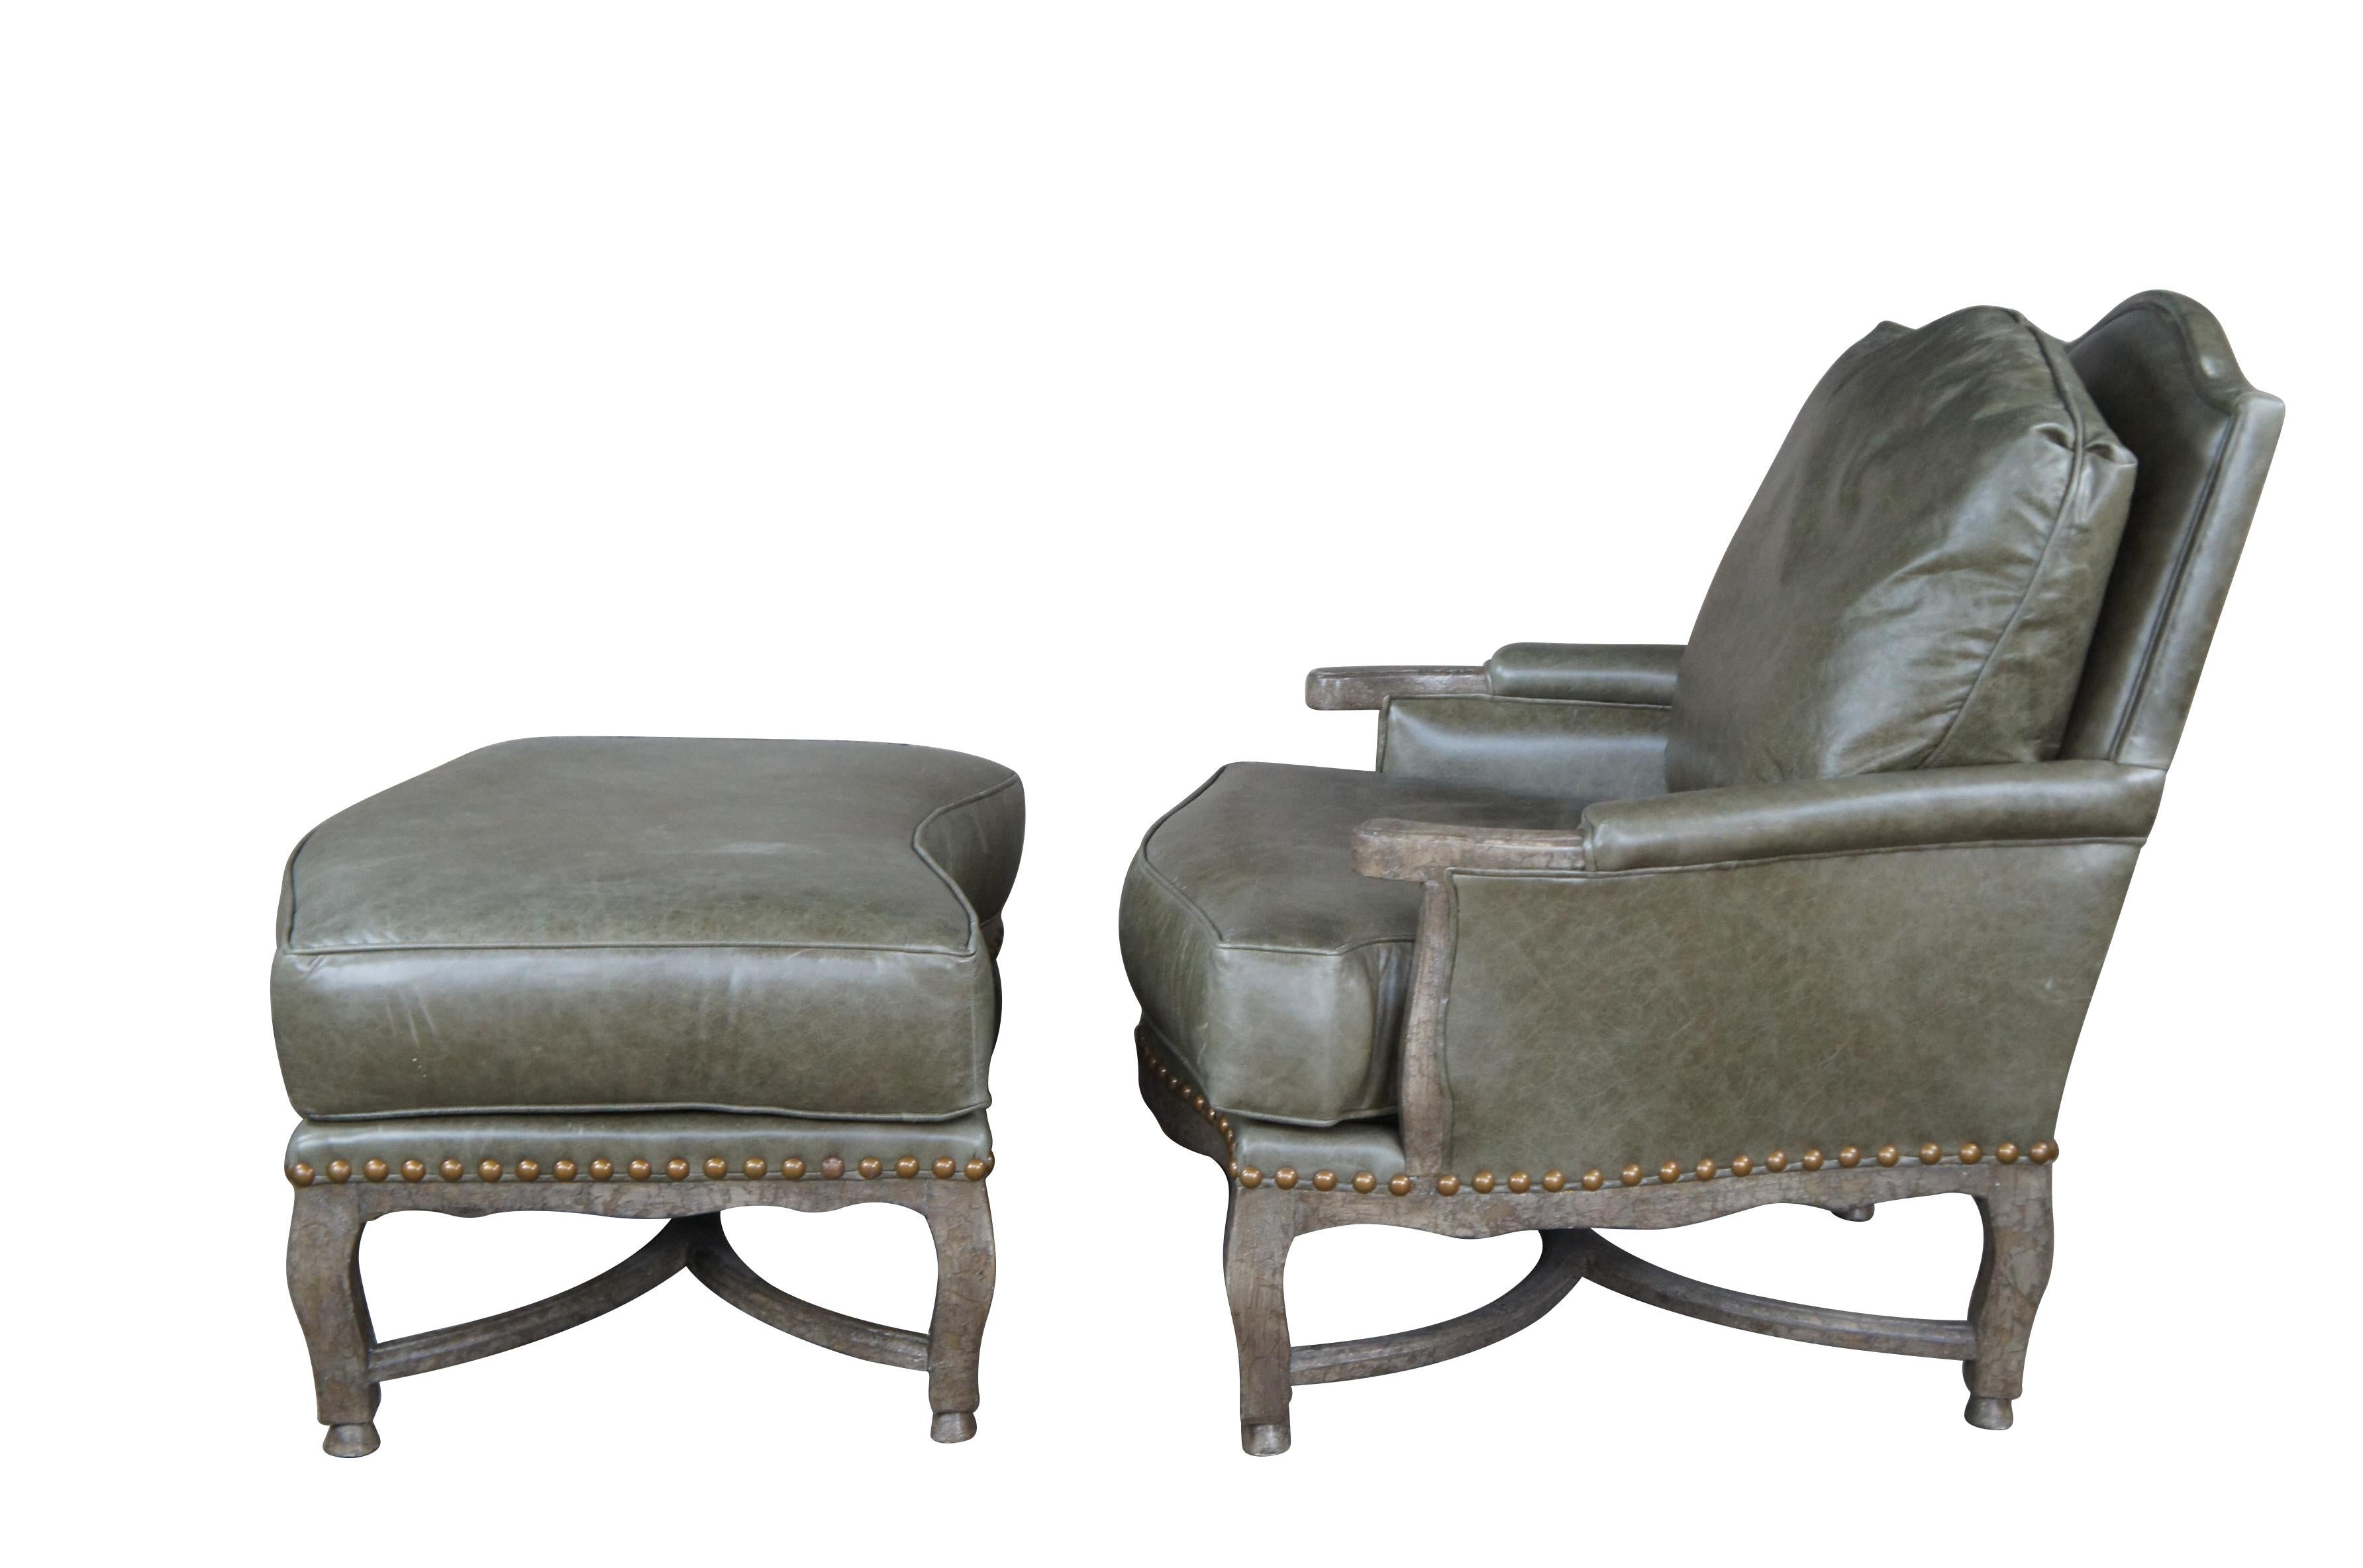 Vintage Dakota Bergere chair and ottoman by Hammer Fine Furniture. Featuring French styling with Tuscan Field Green Leather and Brixton Crackle finish frame with nailhead trim.  Made for Joseph Interiors of North Palm Beach Florida.

Hammer Fine